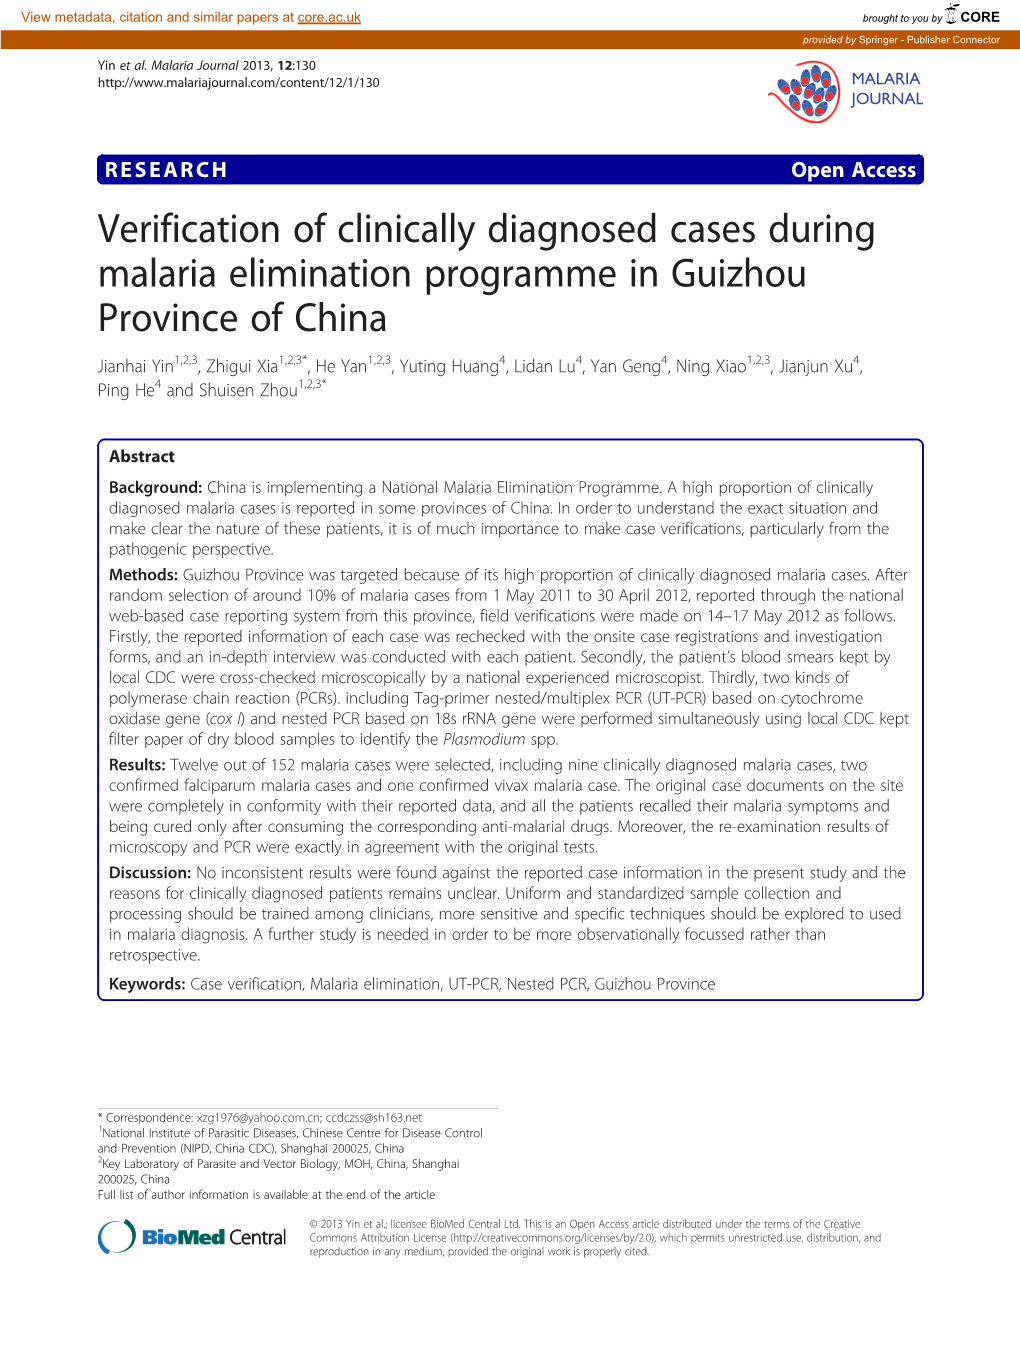 Verification of Clinically Diagnosed Cases During Malaria